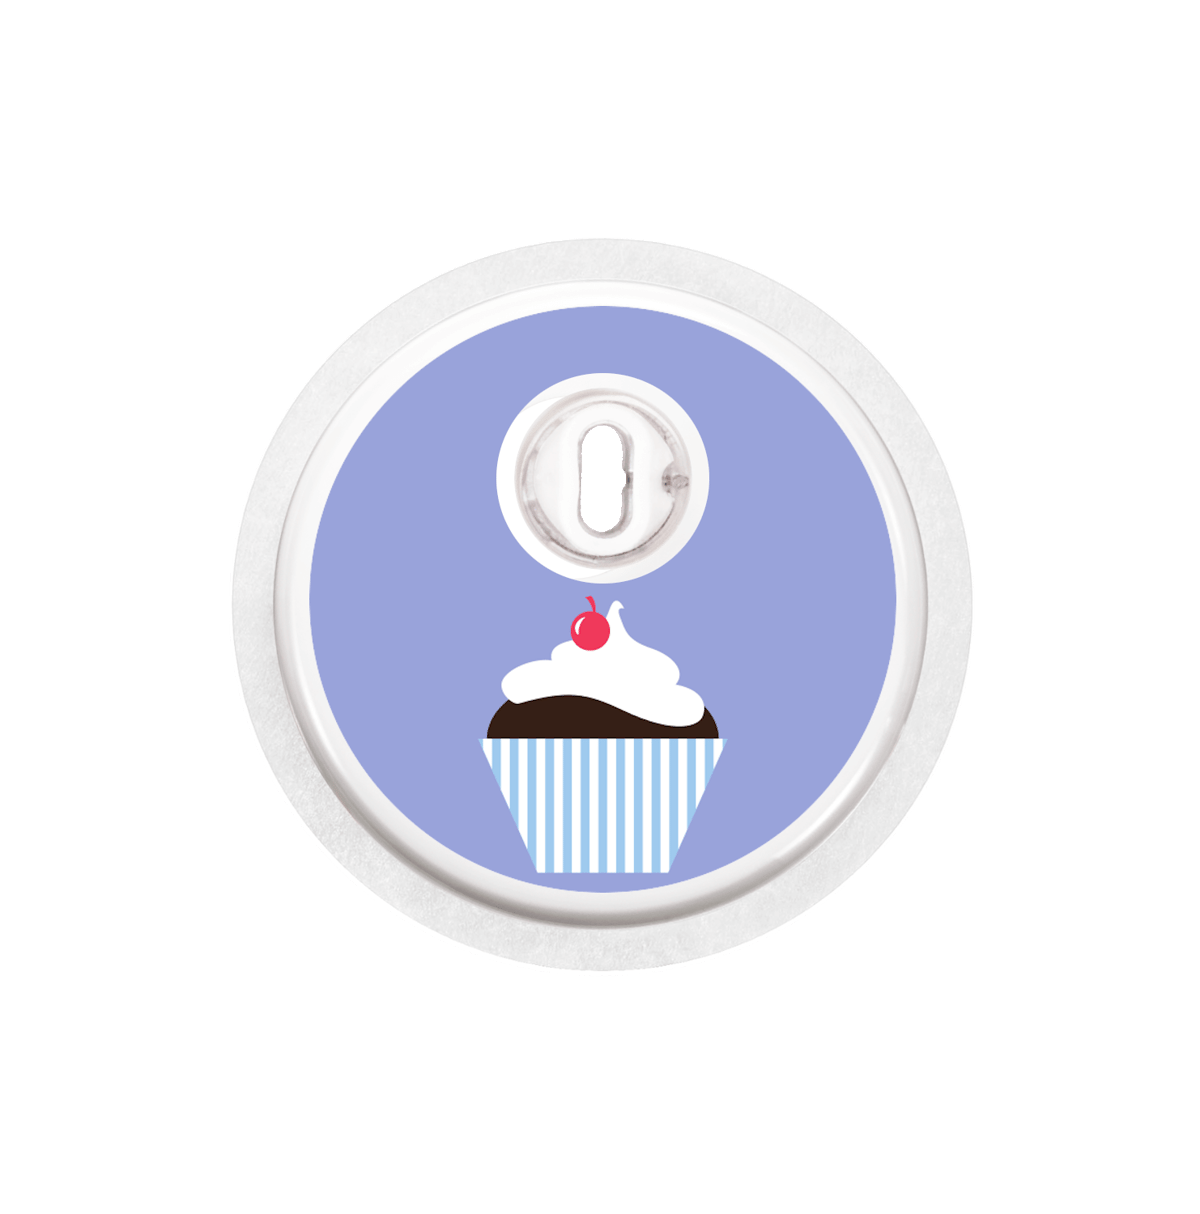 Cupcake blue Freestyle Libre 3 Sticker  Diabetes Accessories & Stickers  Shop - PEP ME UP on